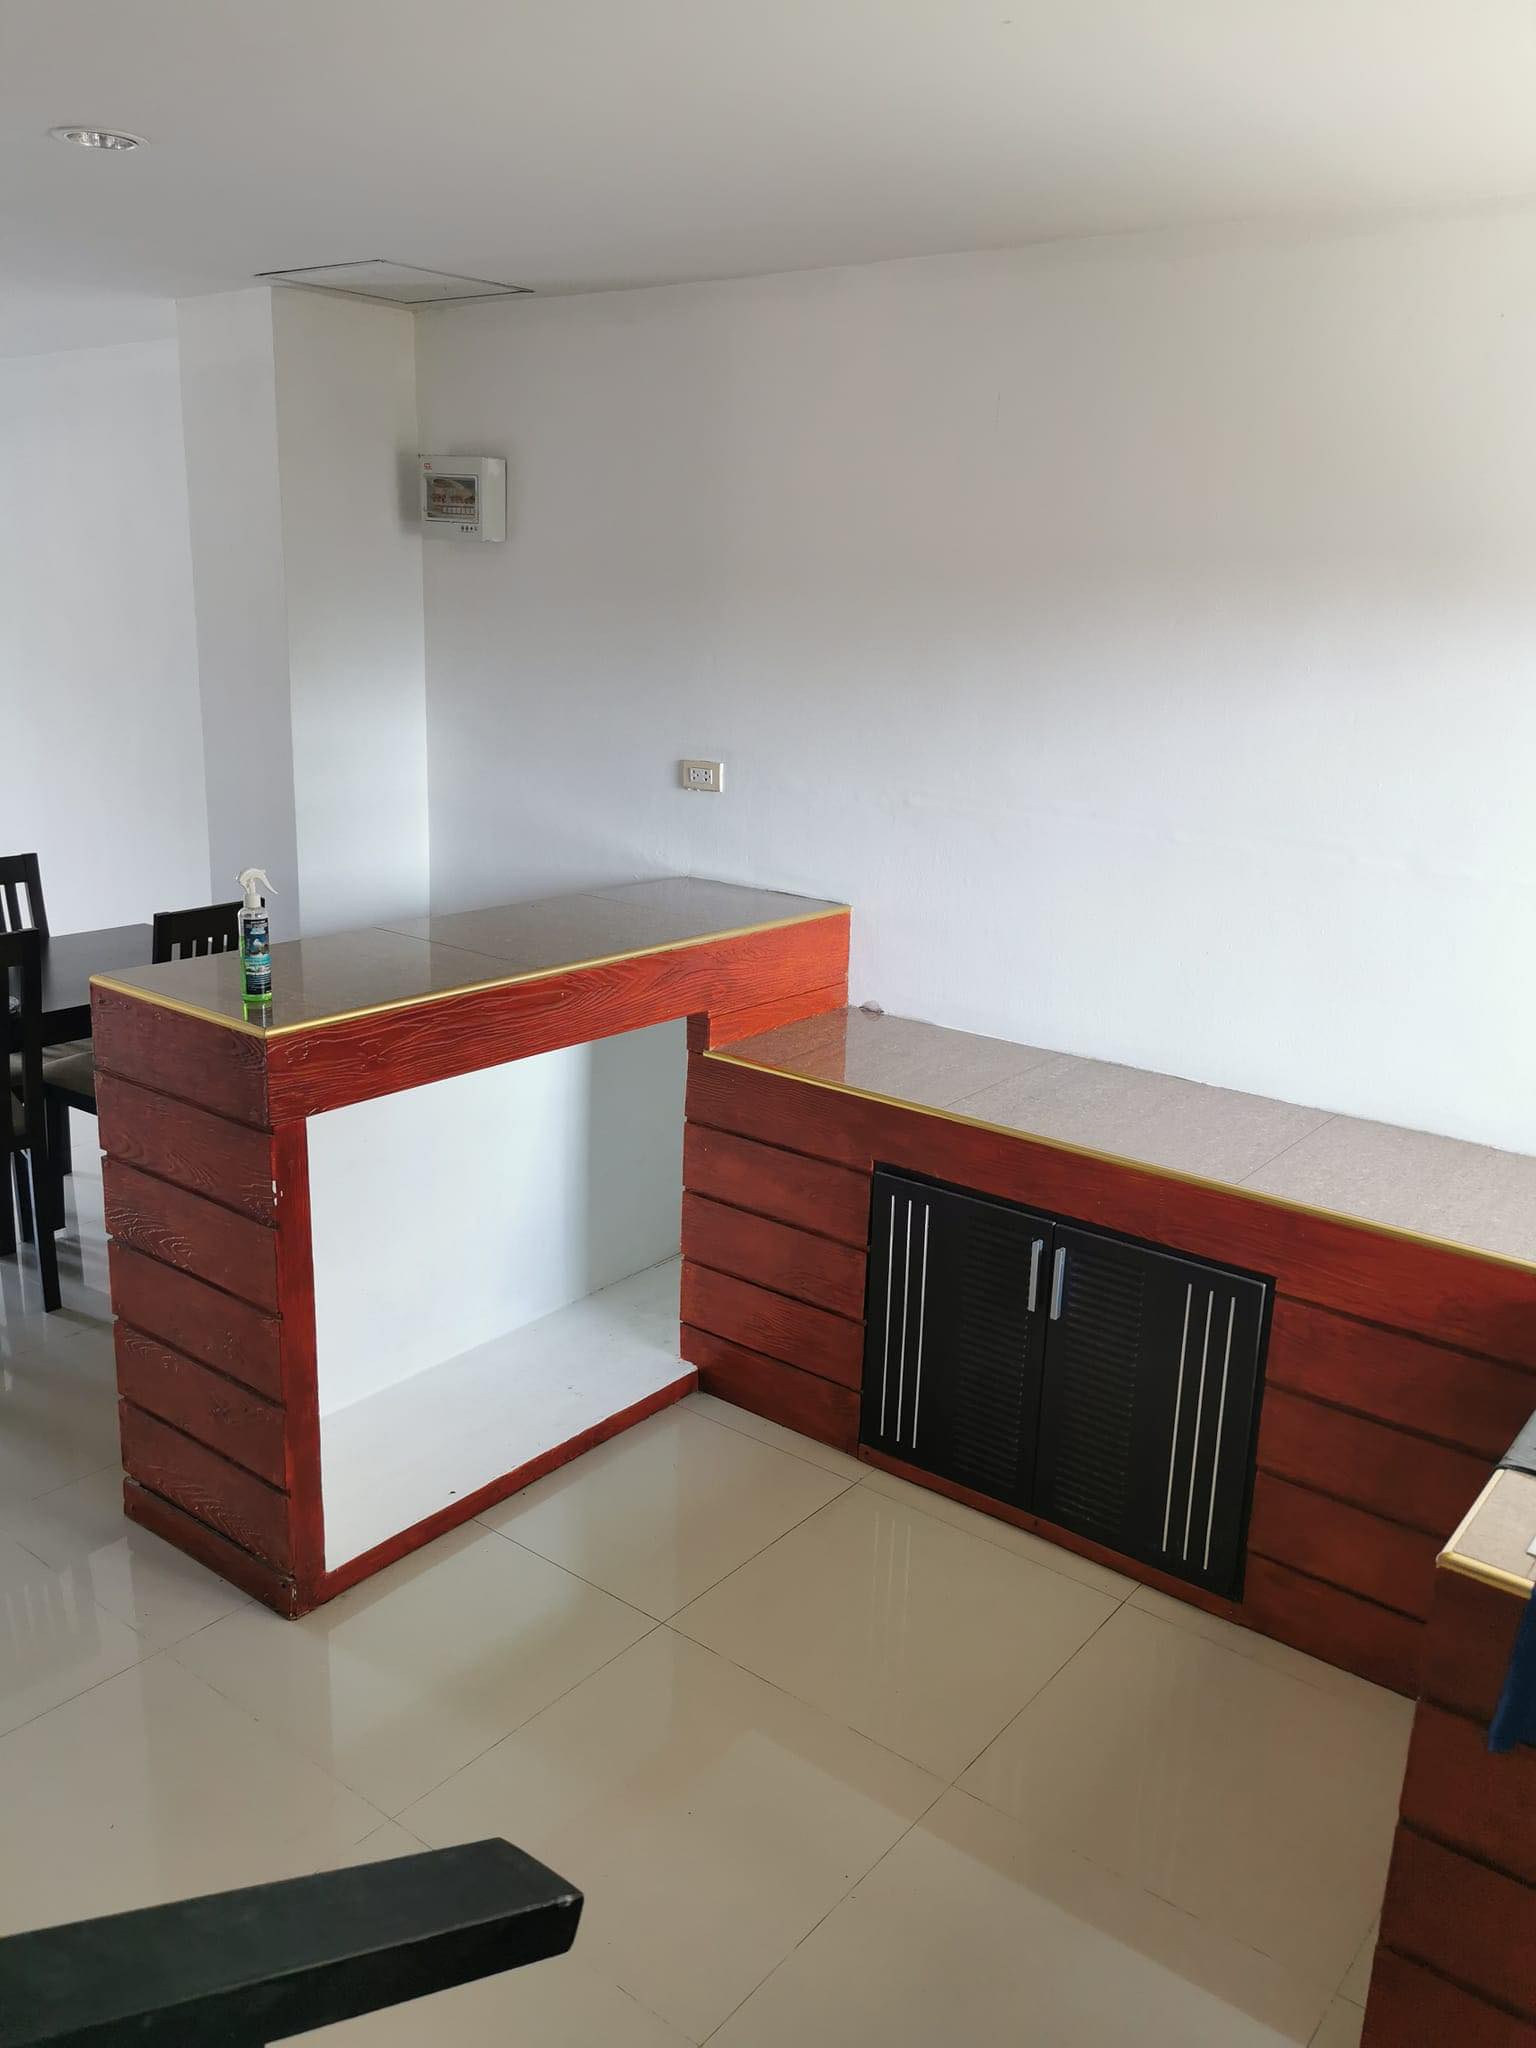 Anyamanee village. Fully furnished 2 bedrooms house in North Pattaya